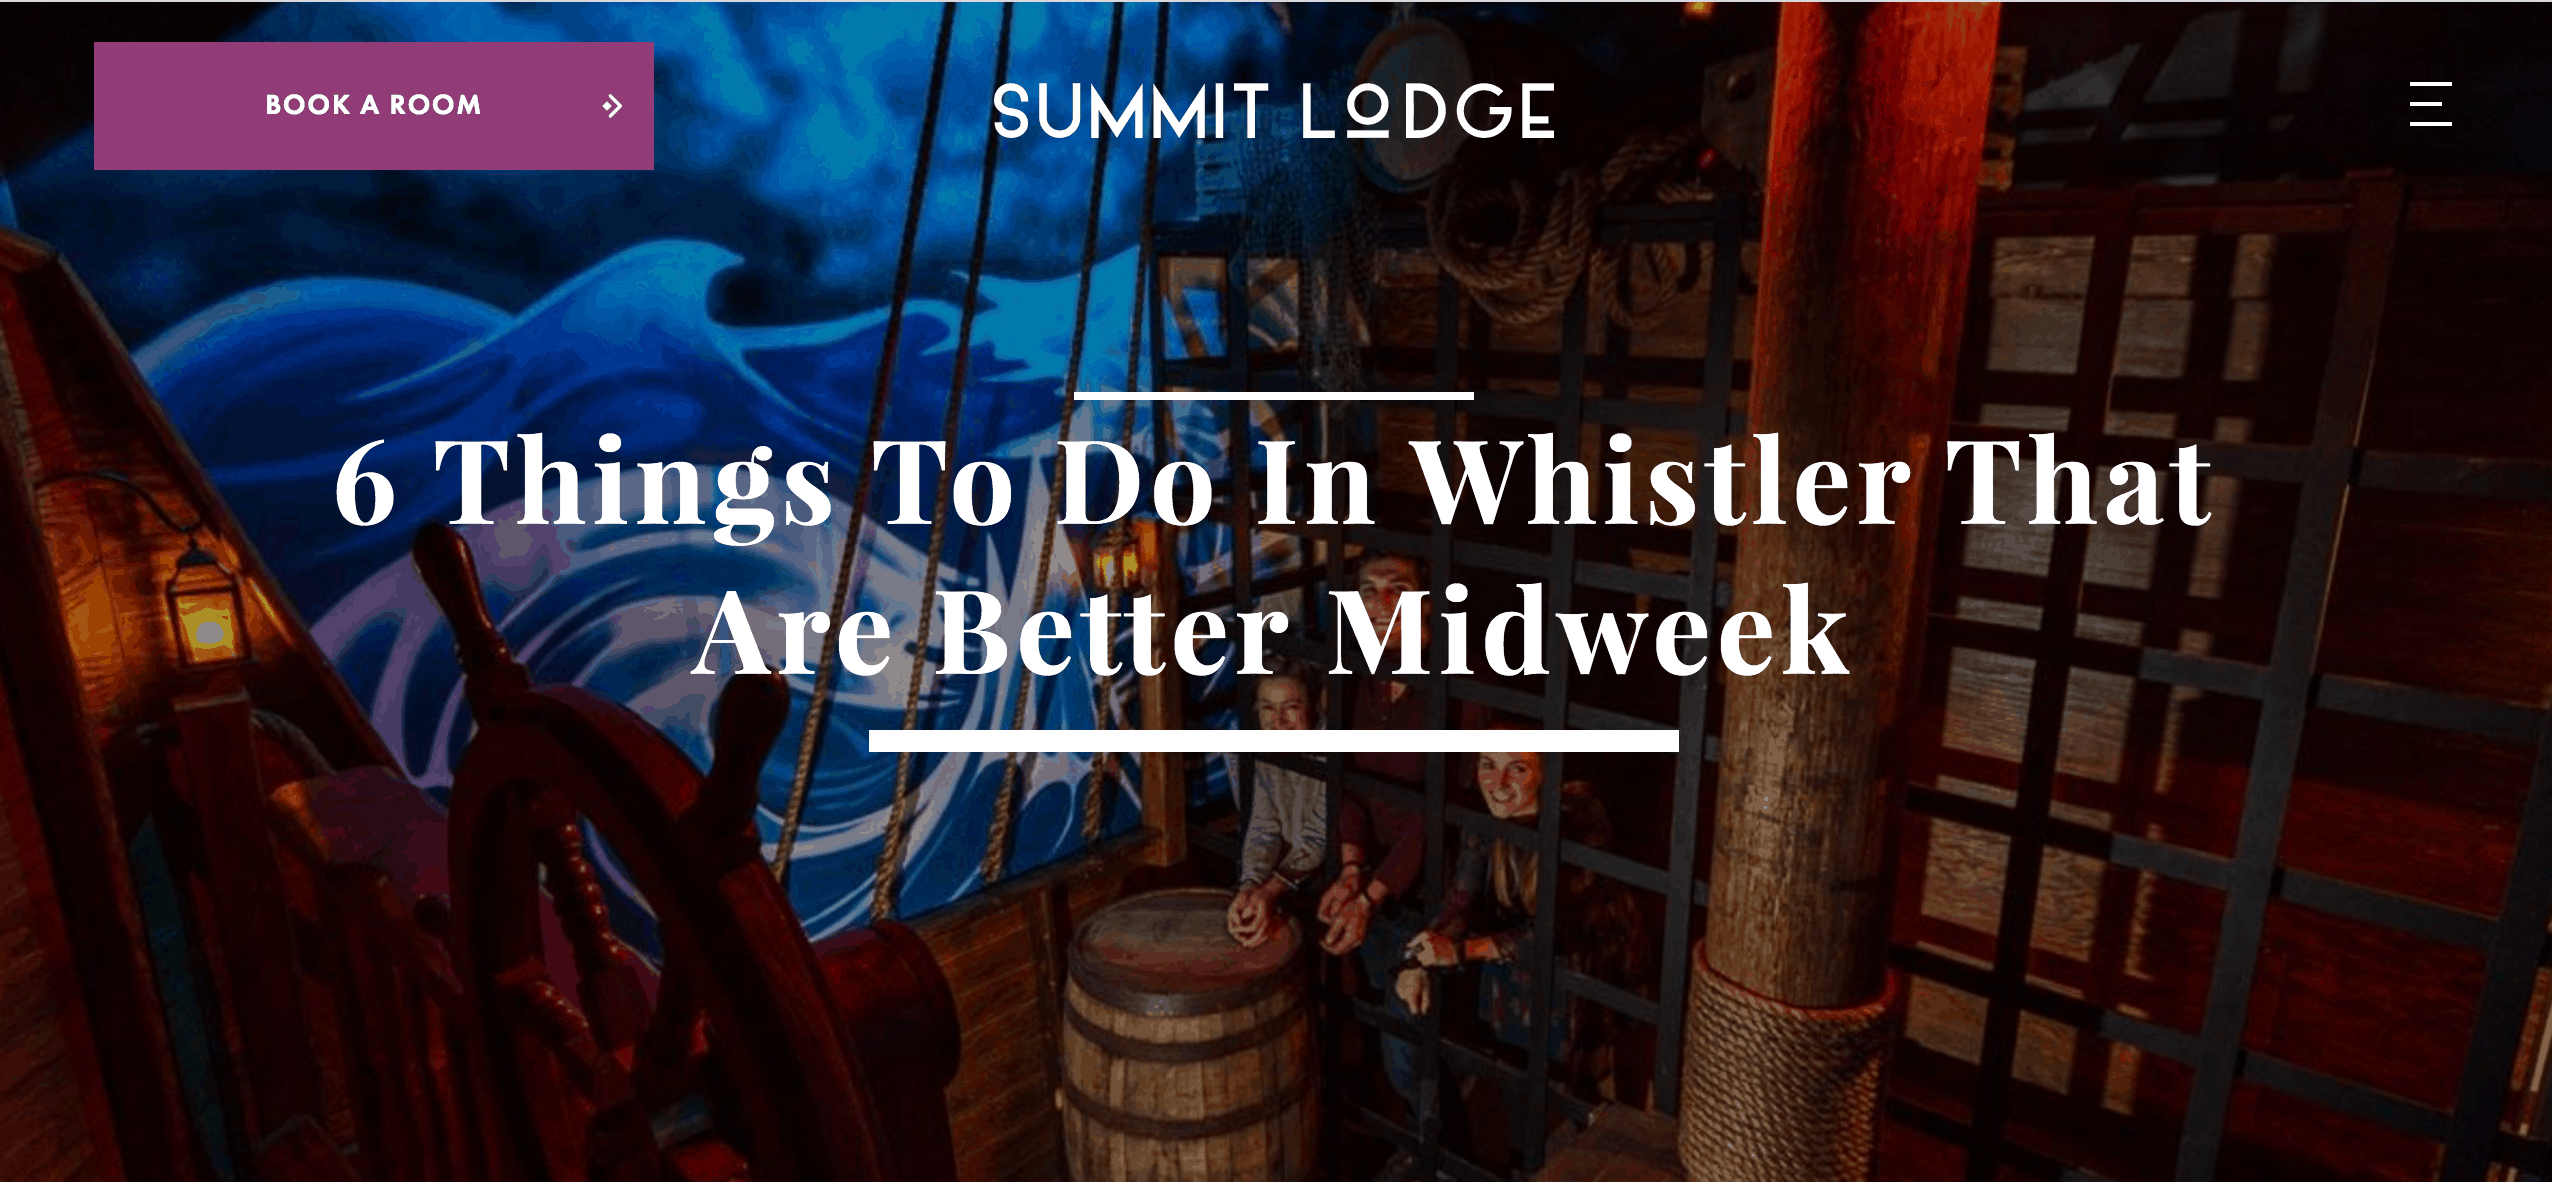 Summit Lodge - Things to do in Whistler Midweek Article